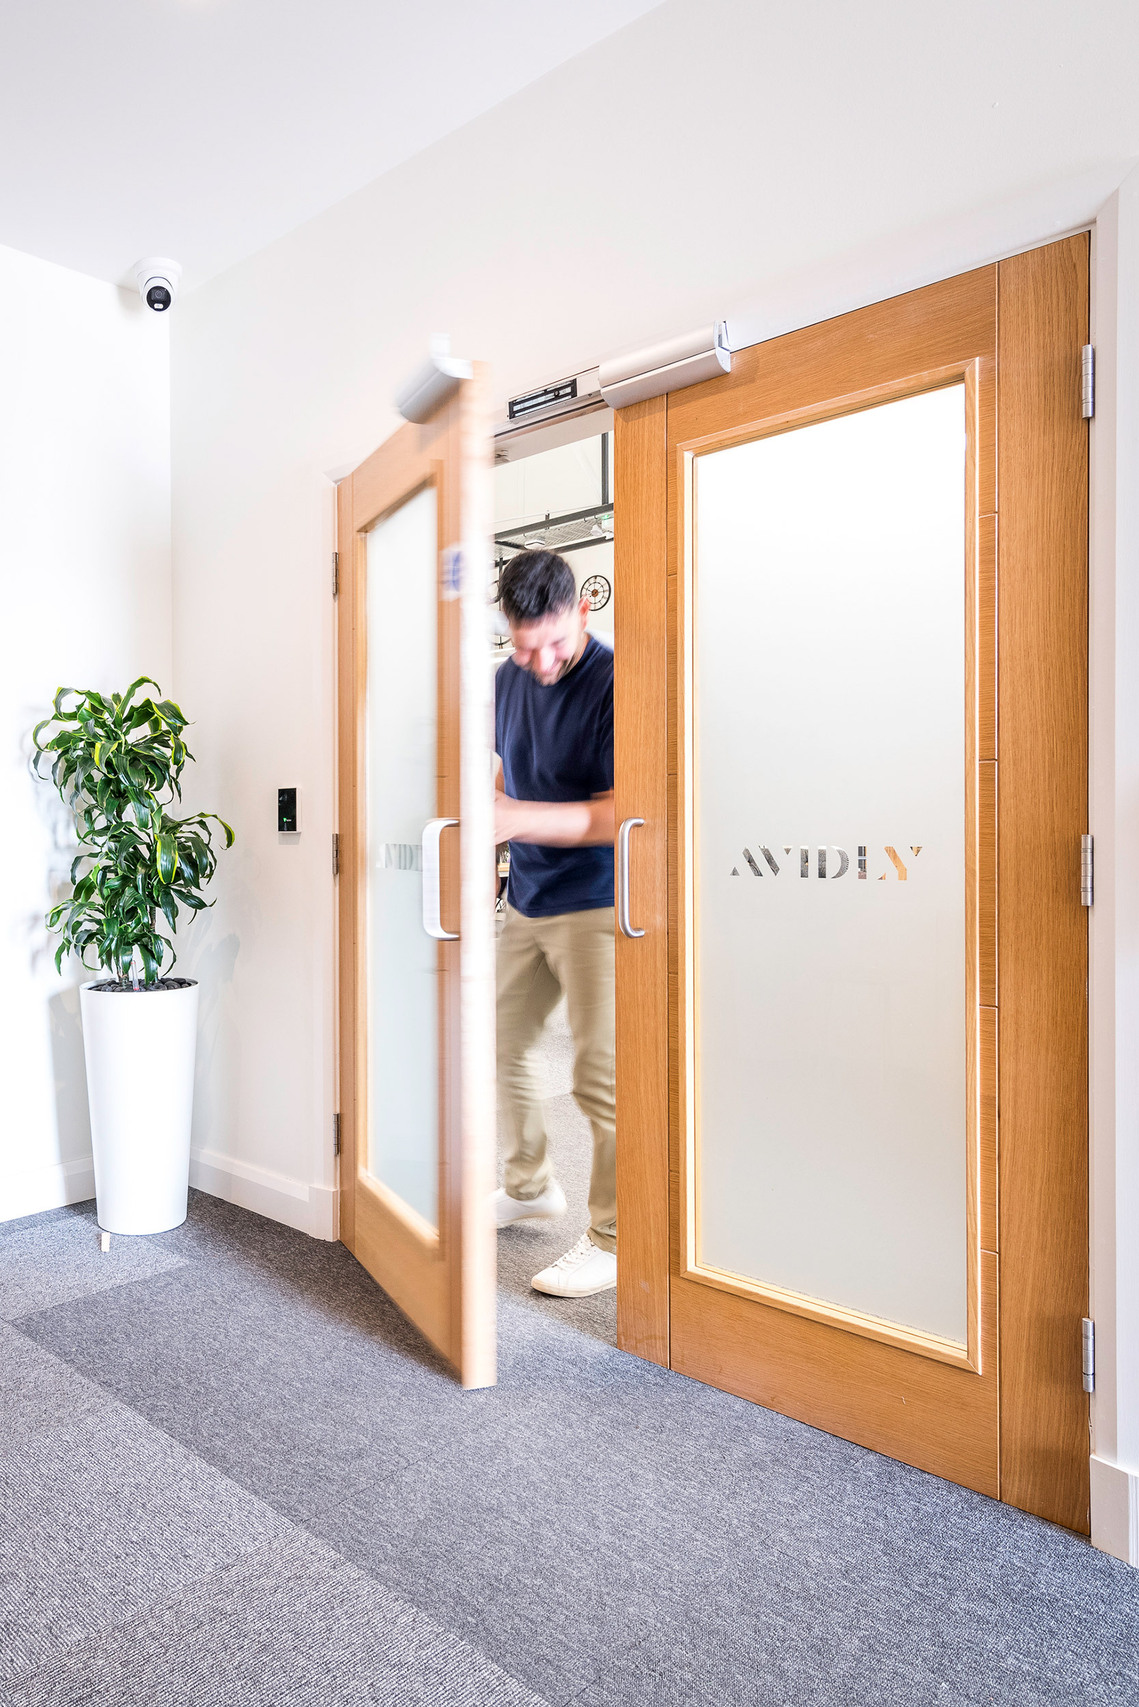 Man walking out of branded glass office door into reception area with plant